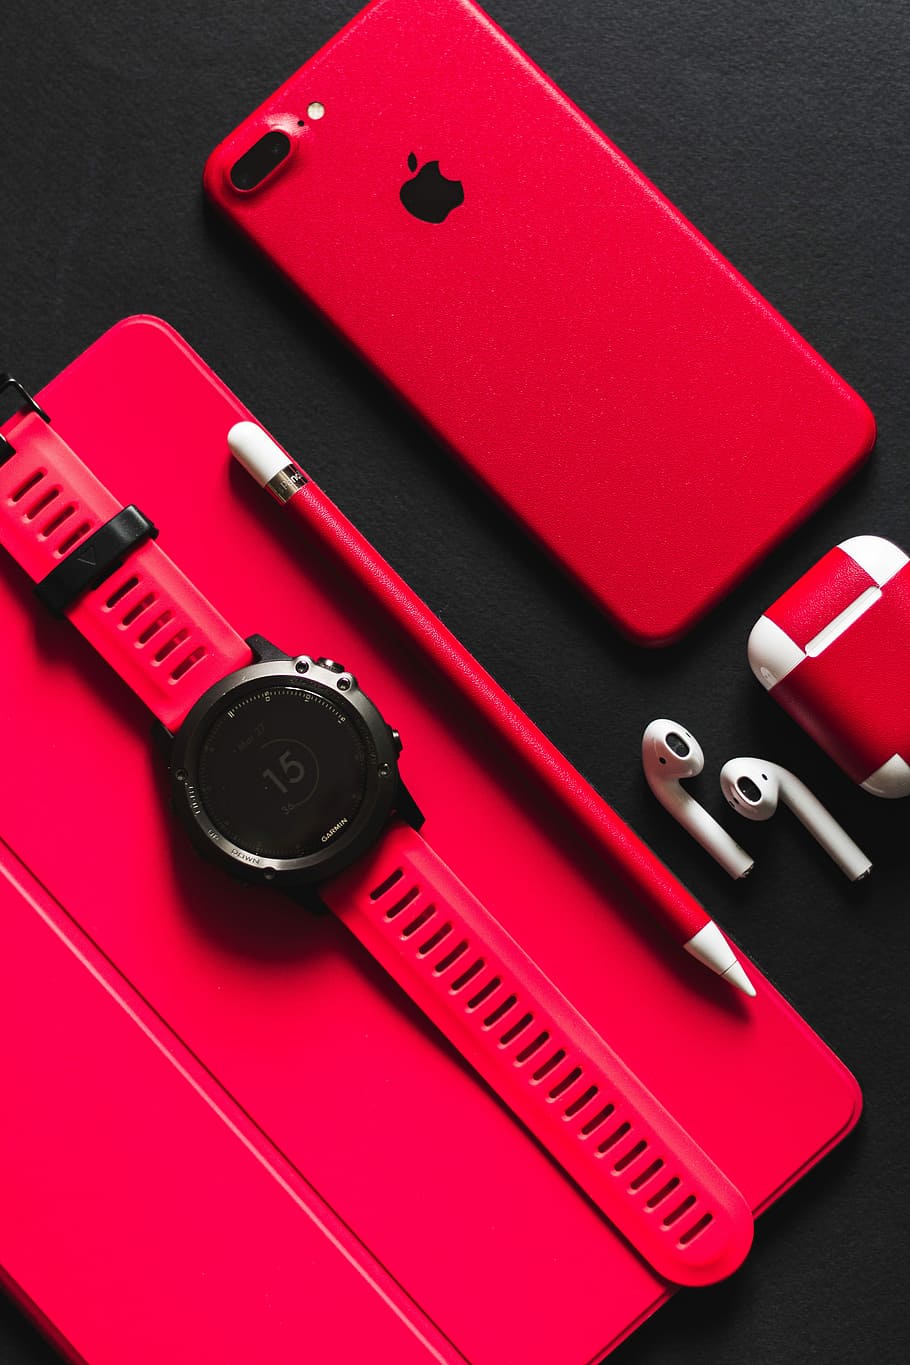 HD wallpaper: smartwatch, stylus, AirPods, and product red iPhone